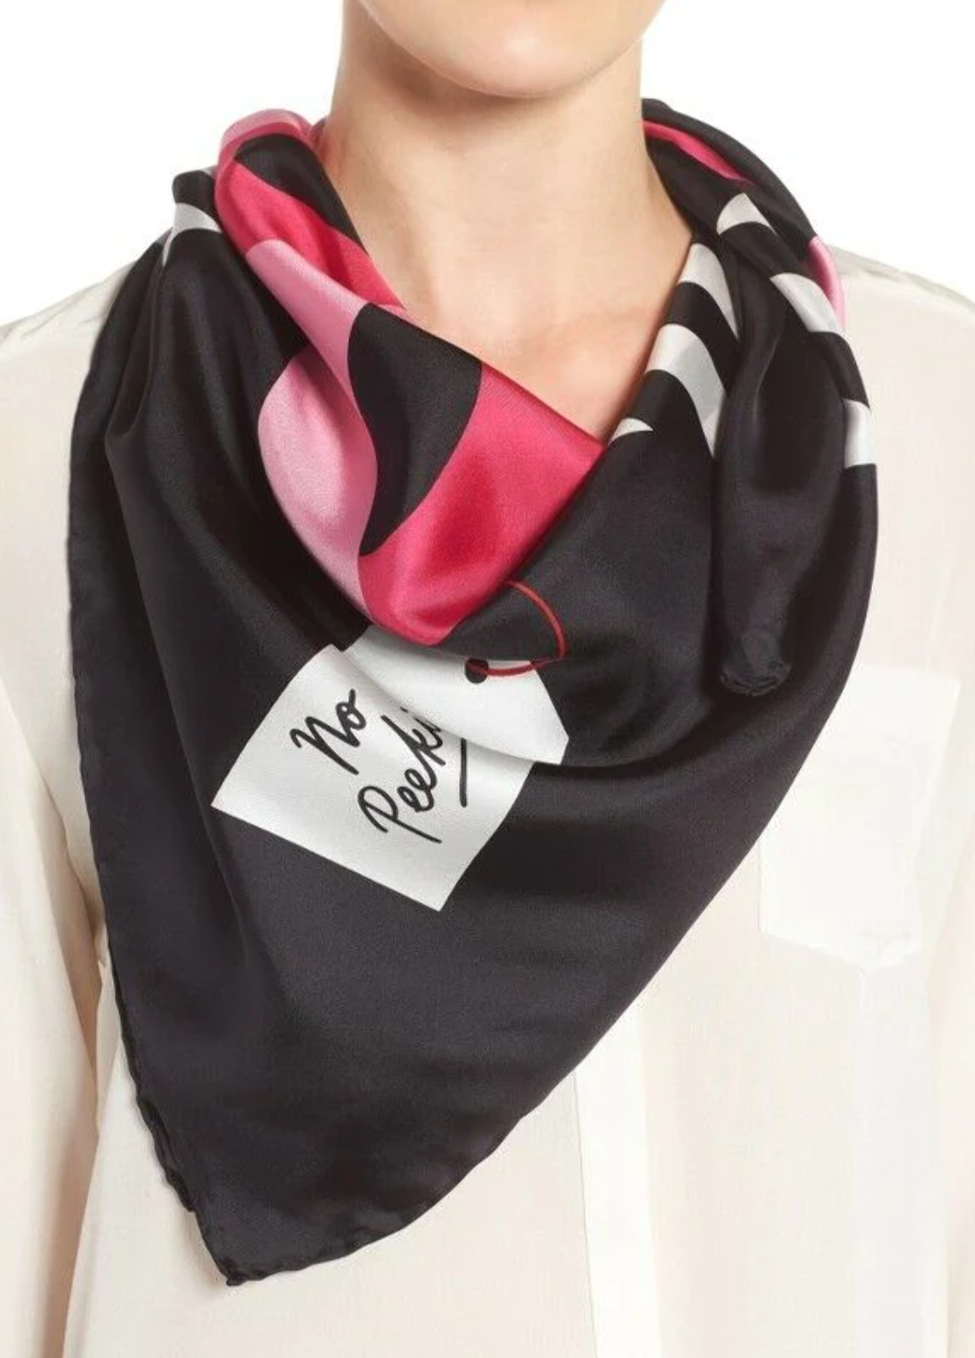 Kate Spade Silk Scarf Square Womens Black Pink Bow Gift Print 34 x 34in